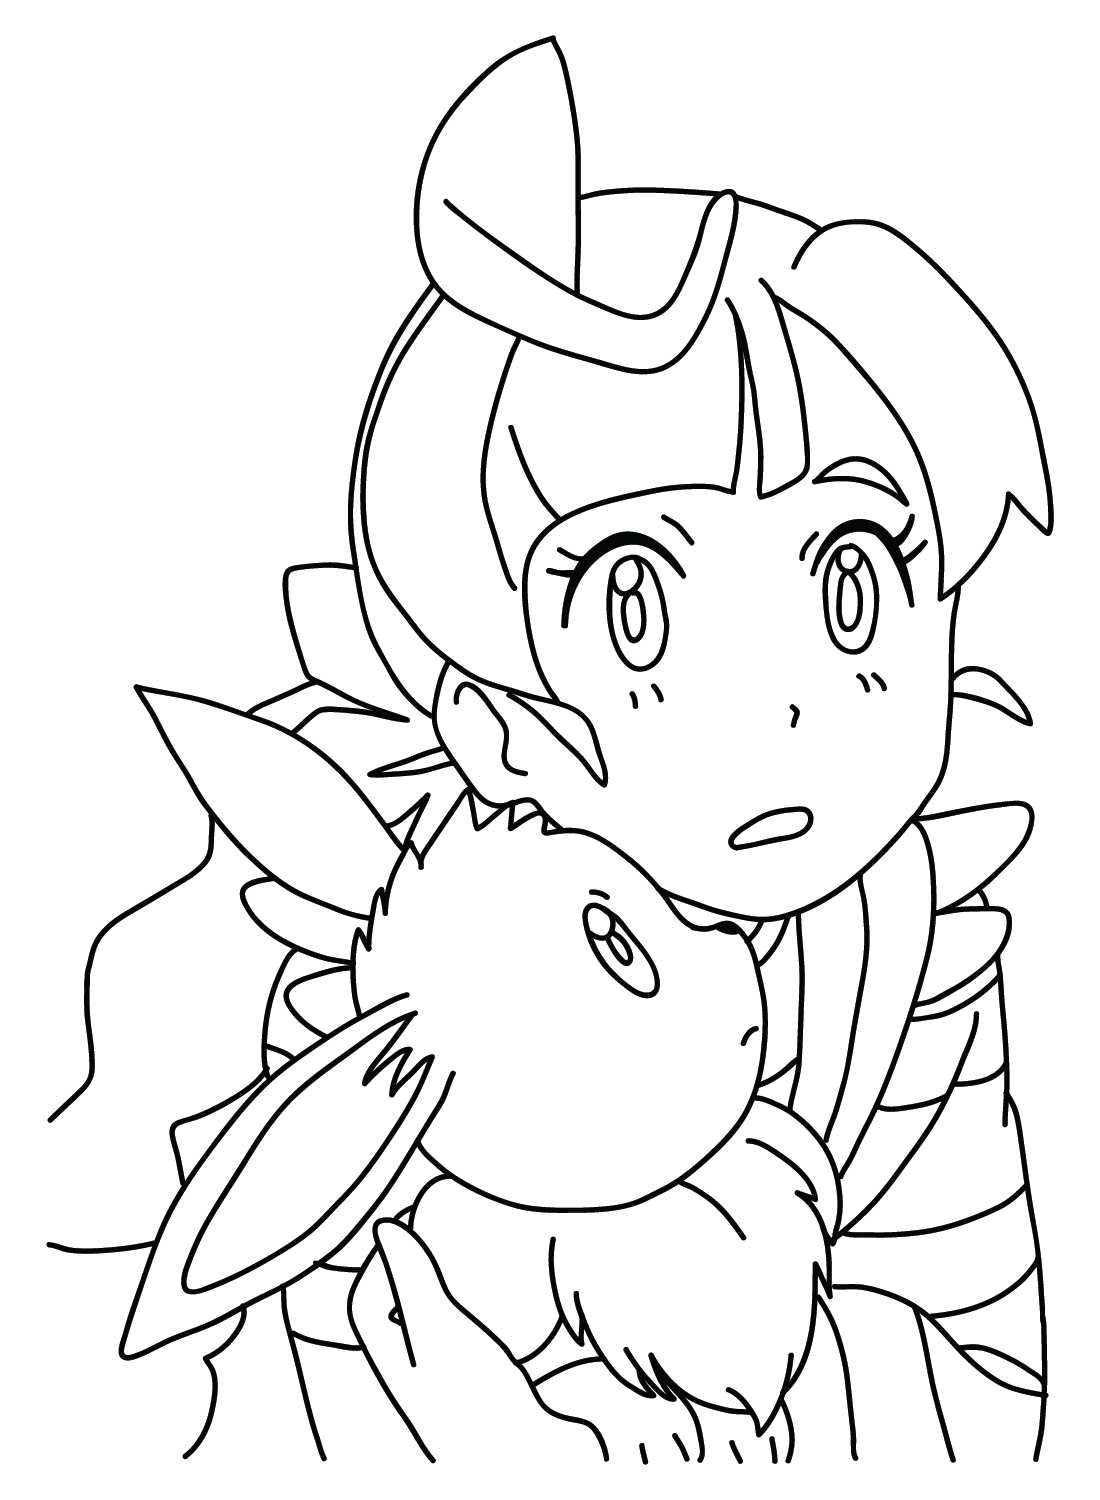 Images Eevee Pokemon Chloe Cerise to Color from Eevee